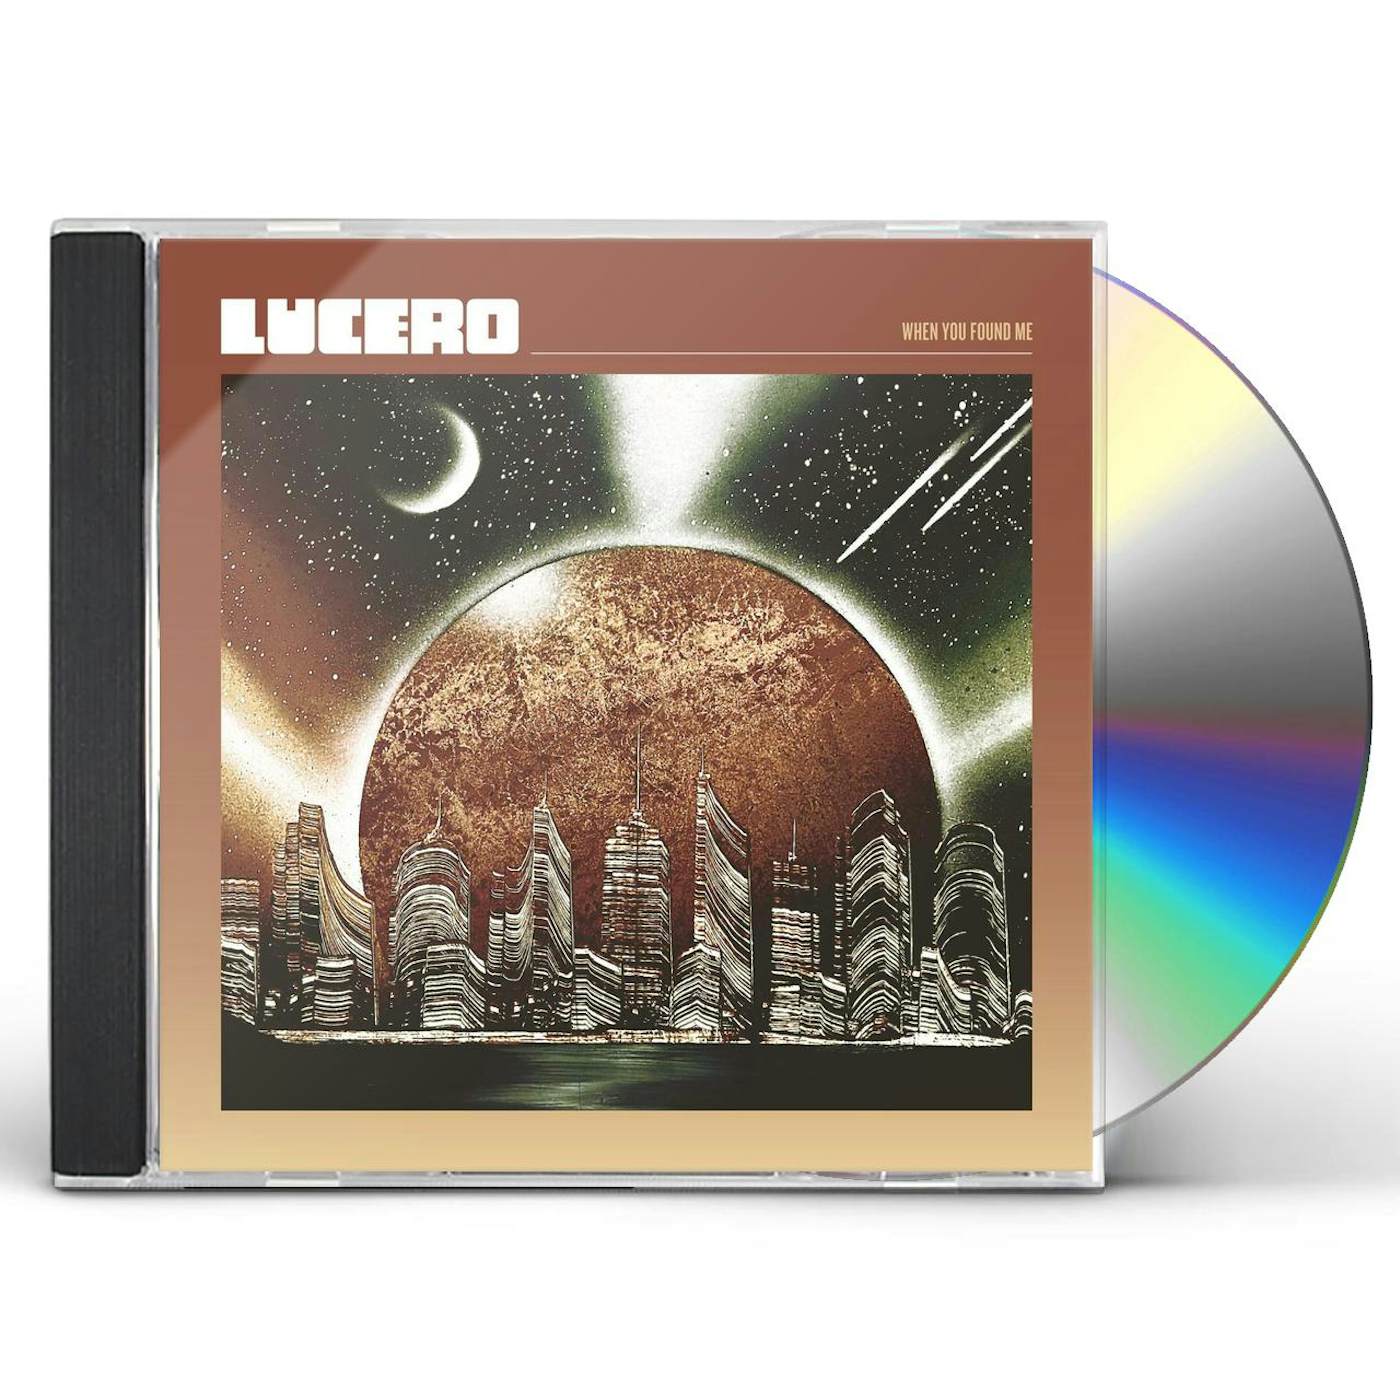 Lucero WHEN YOU FOUND ME CD